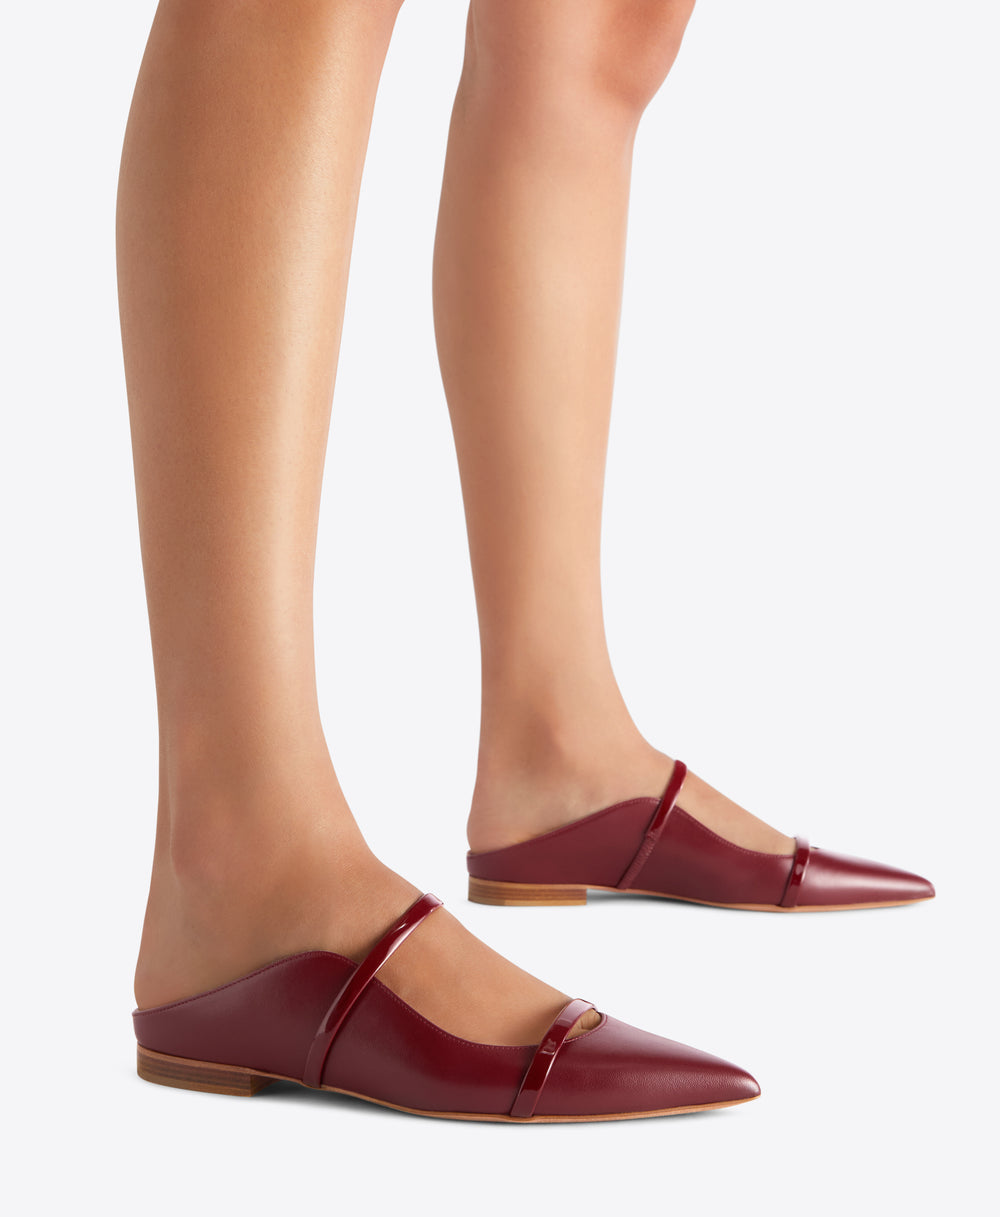 Maureen Flat Red Leather Mules with Straps Malone Souliers